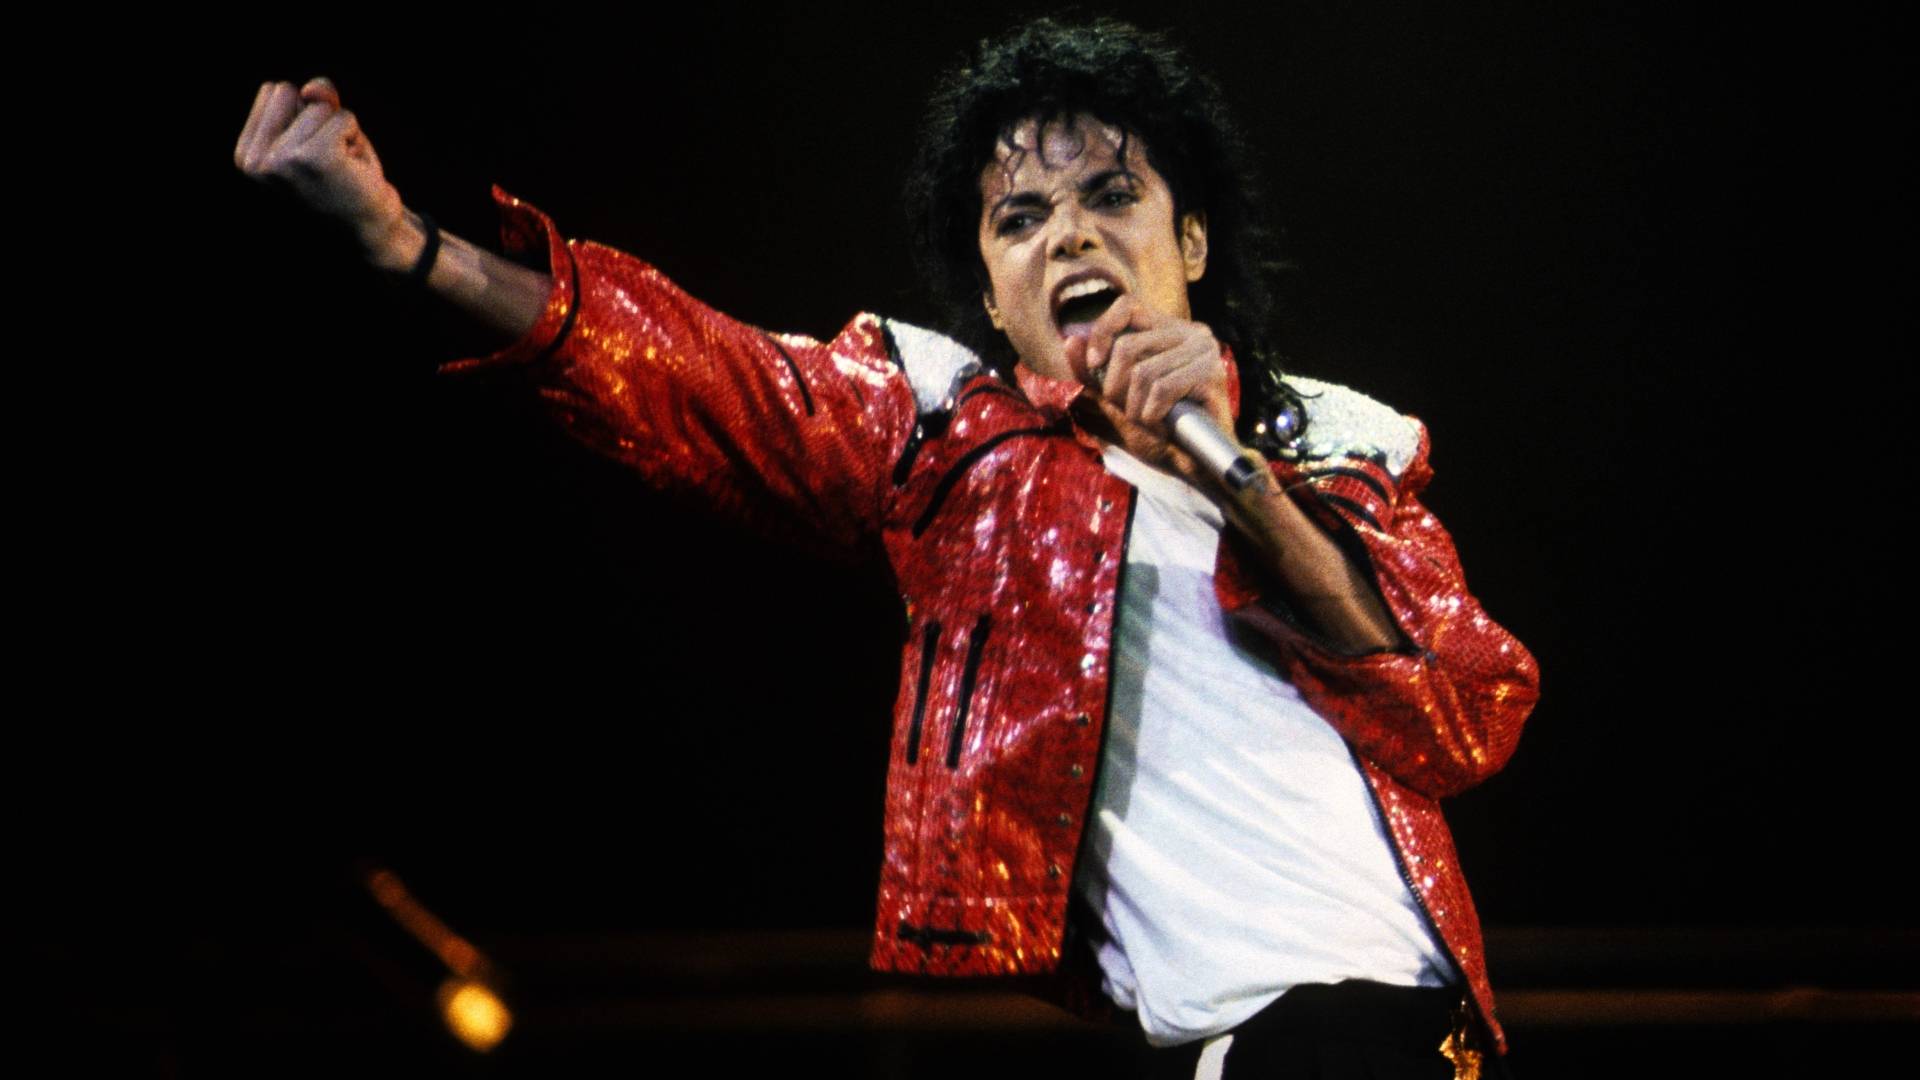 Watch Michael Jackson's incredible transformation throughout the years